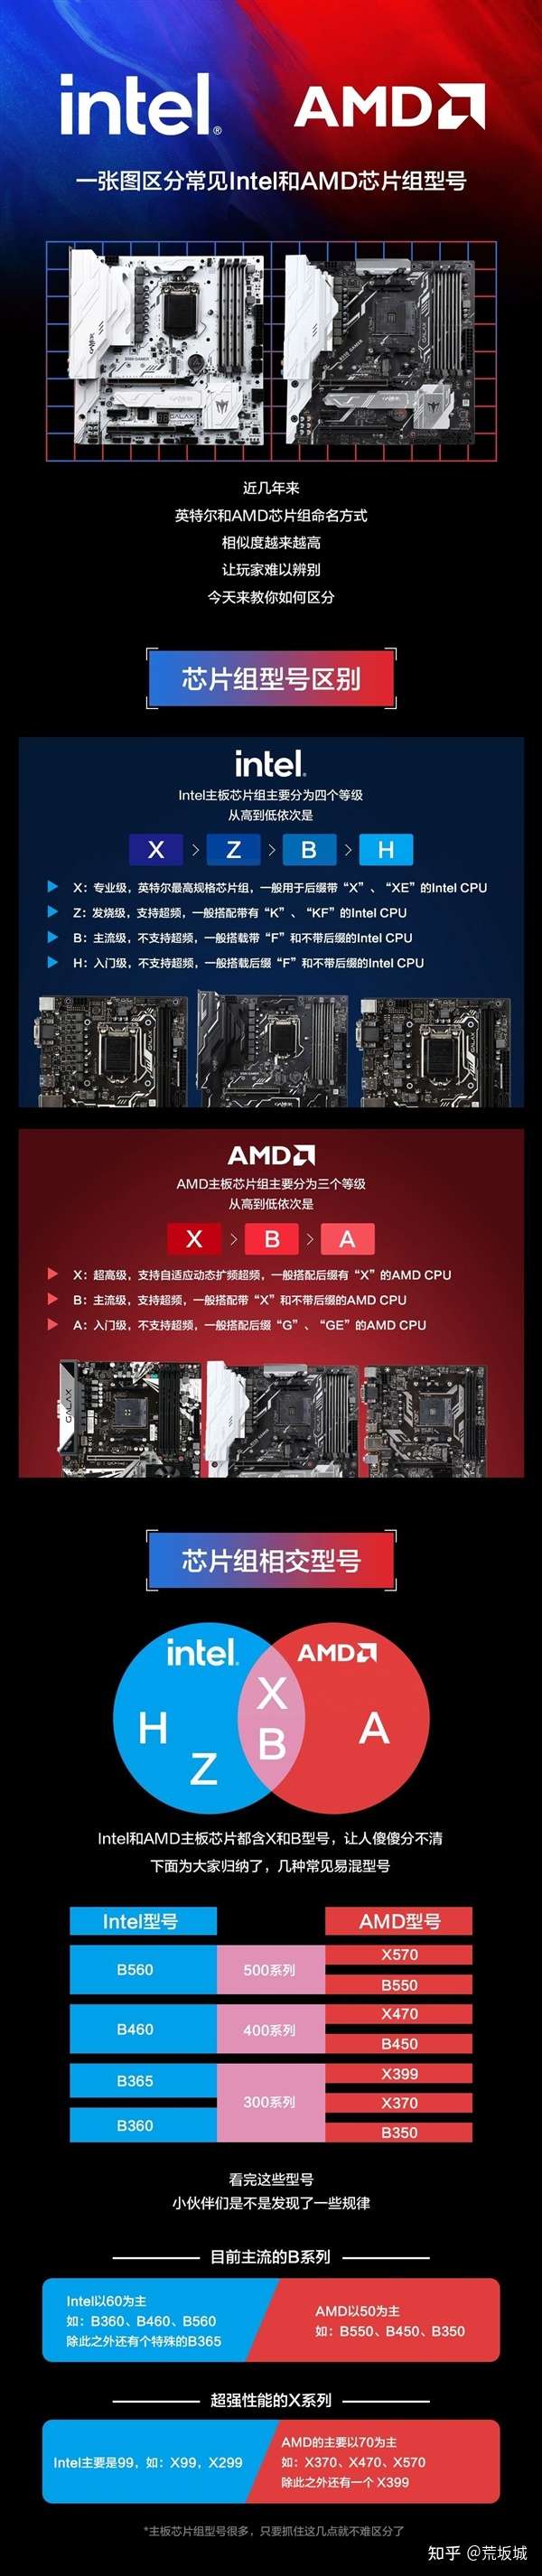 Differences between AMD and Intel motherboard models